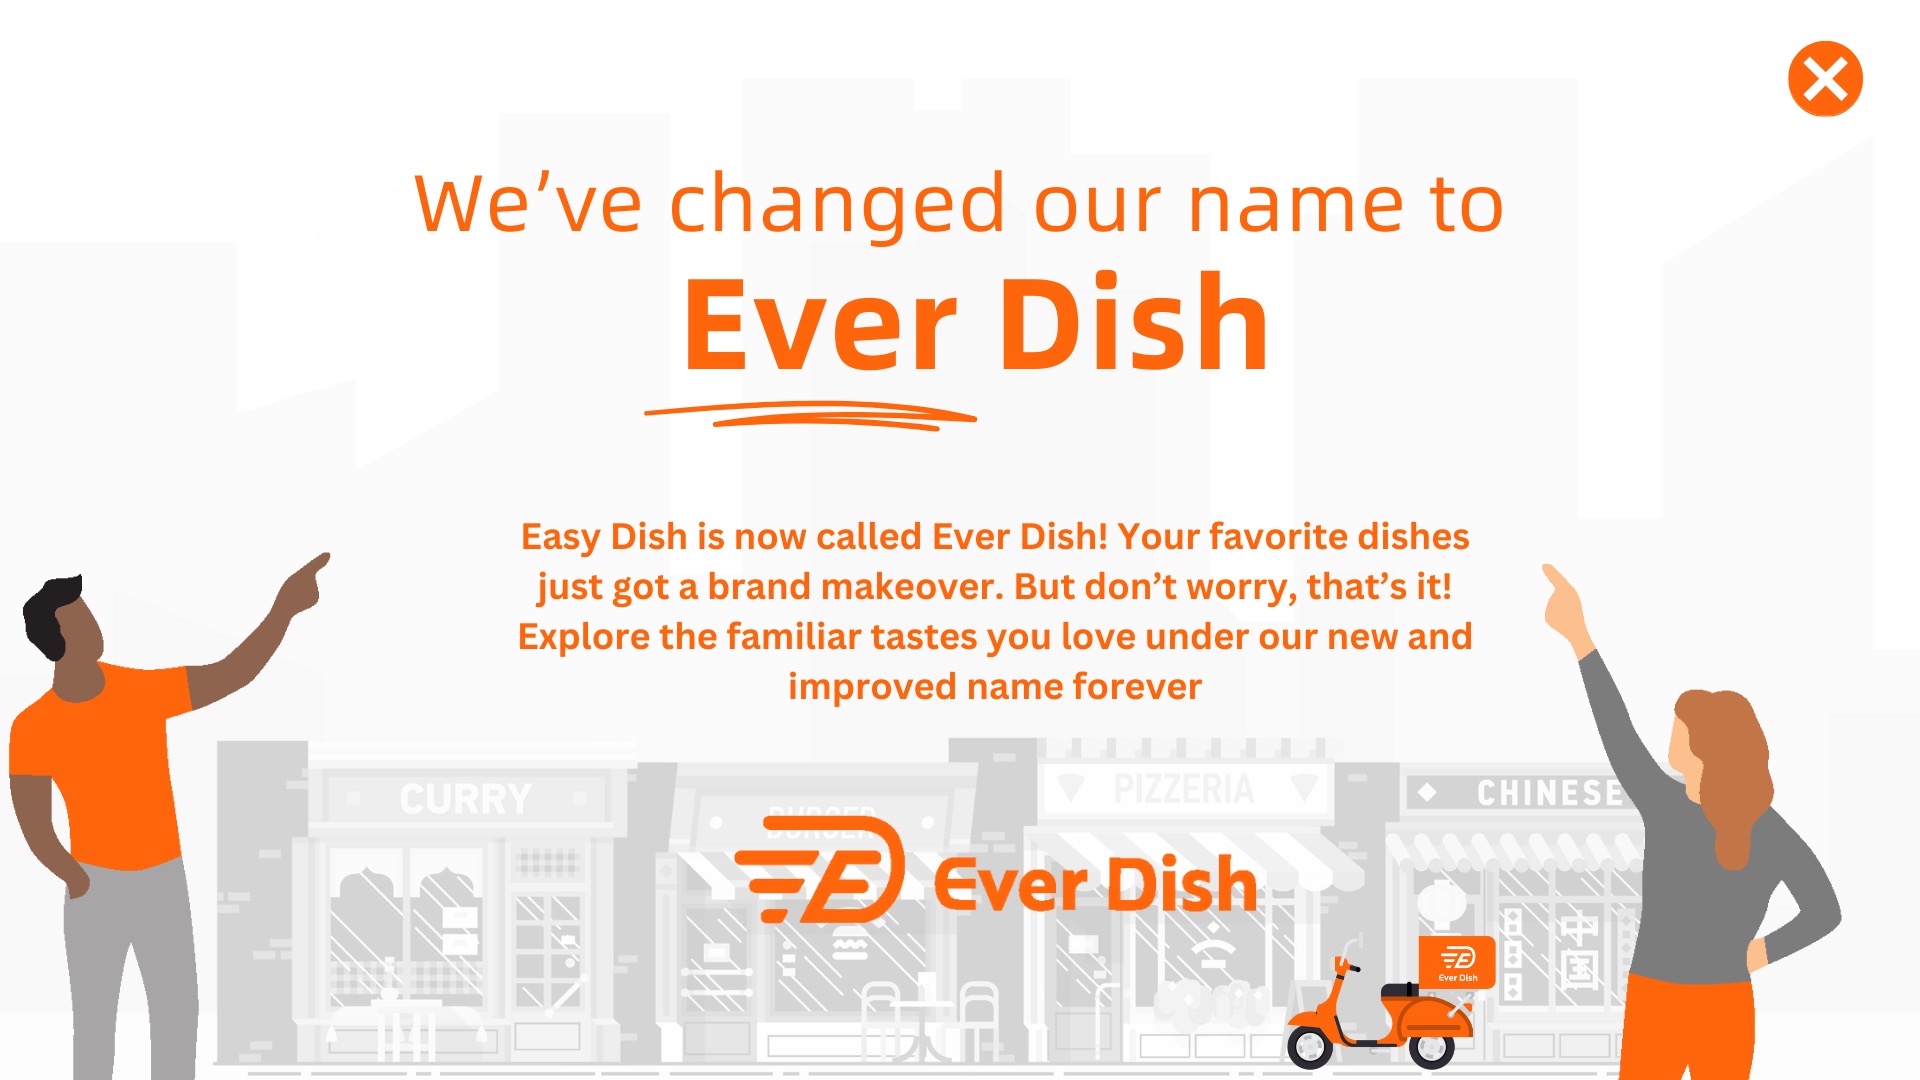 We've changed our name to Ever Dish